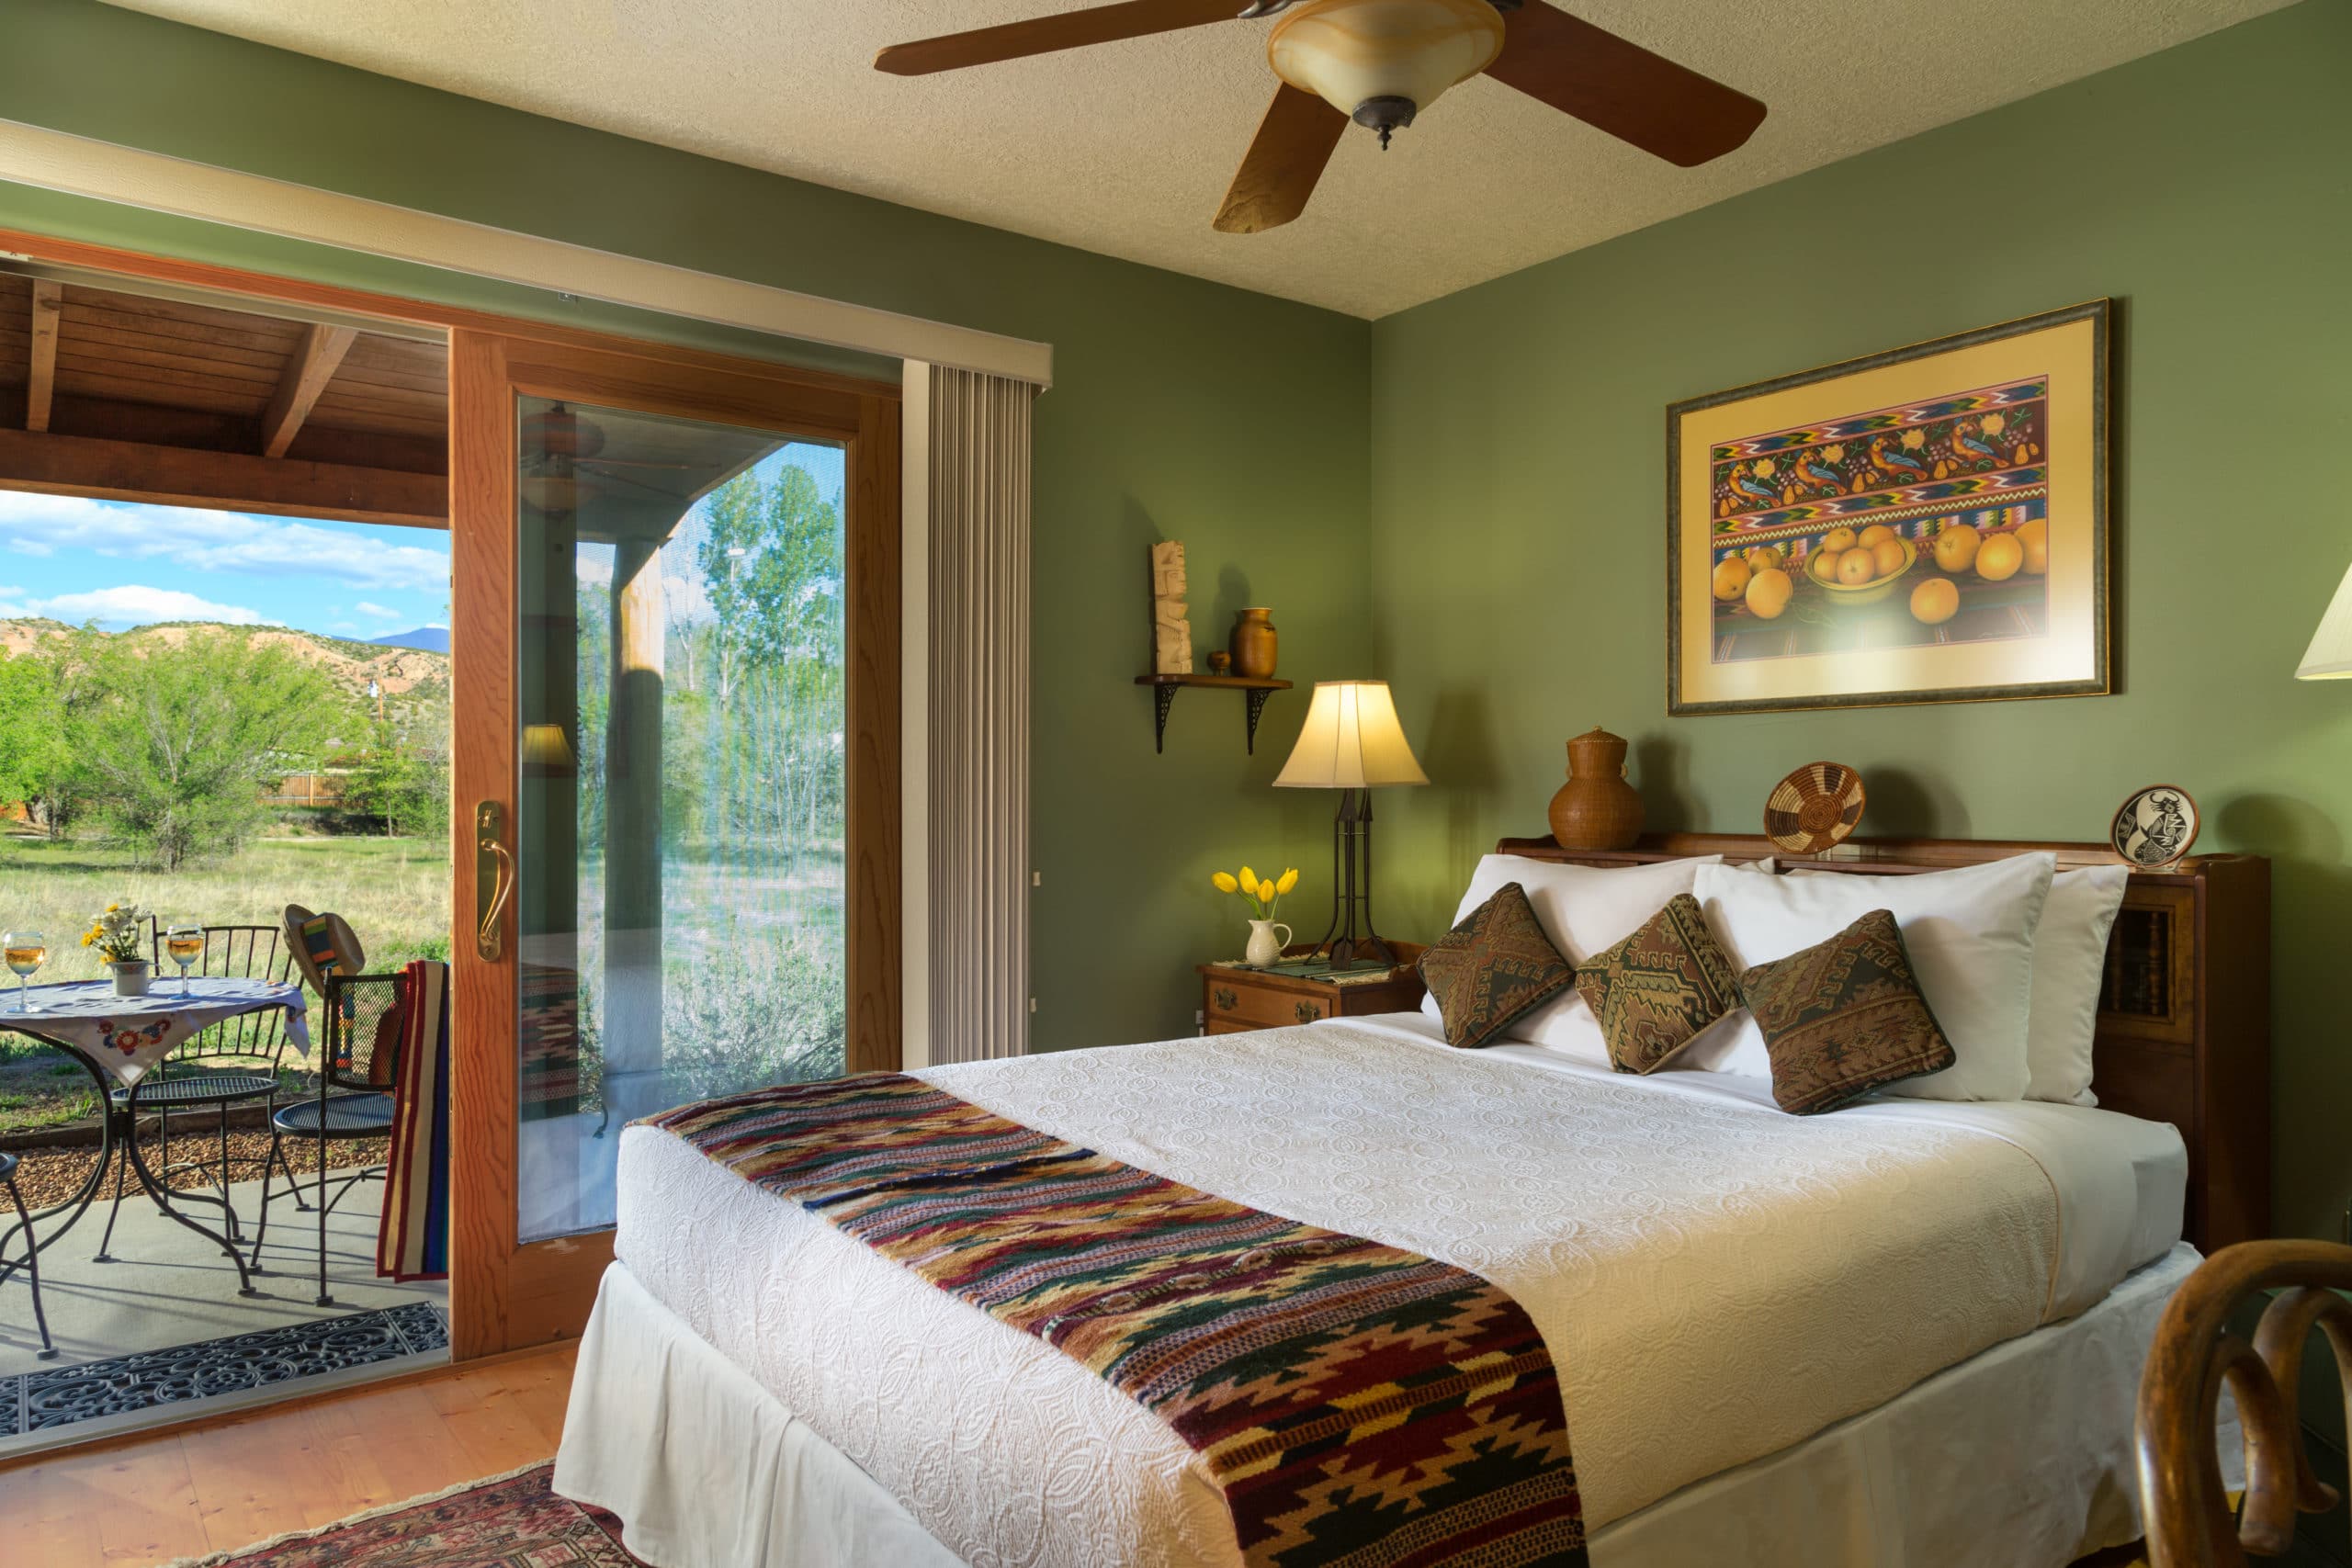 After a wonderful night at the Santa Fe Opera, relax and unwind in the comfort of our Northern New Mexico Bed and Breakfast